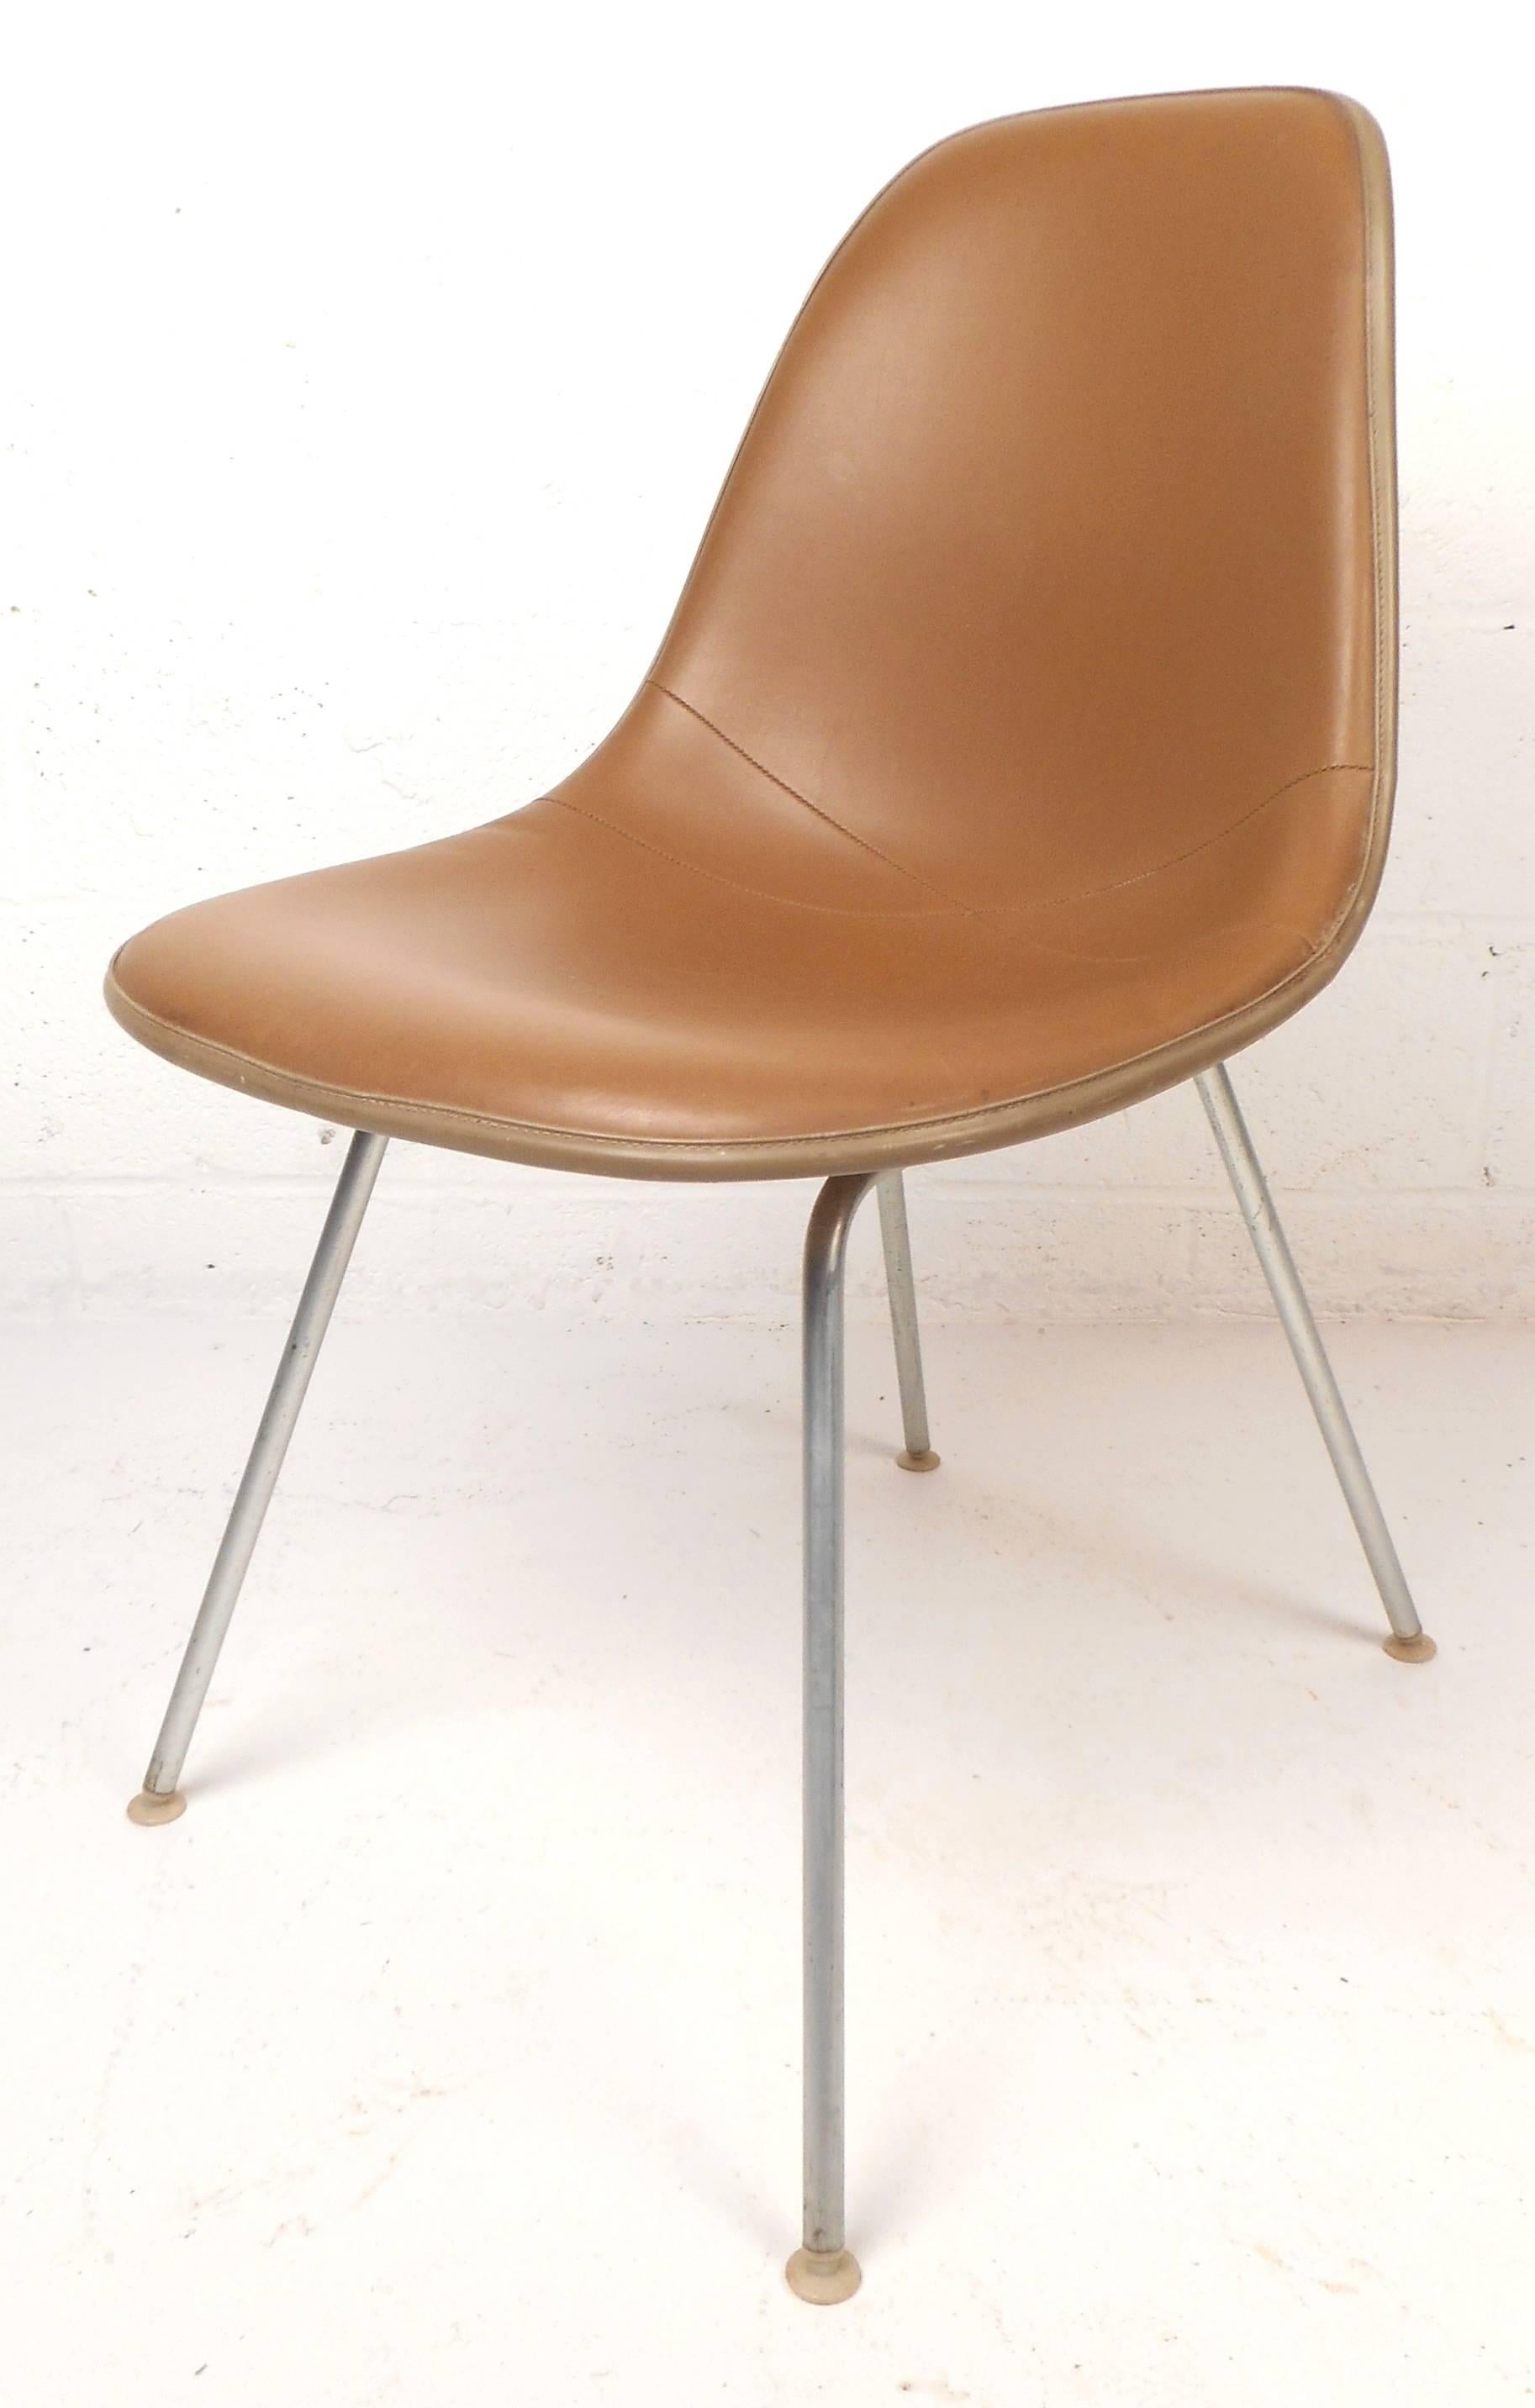 This stunning set of five vintage modern chairs feature the iconic shell design with brown chopped strand fiberglass on the back and original seal brown vinyl upholstery. Sleek design with narrow metal H-mount bases ensure sturdiness and style in